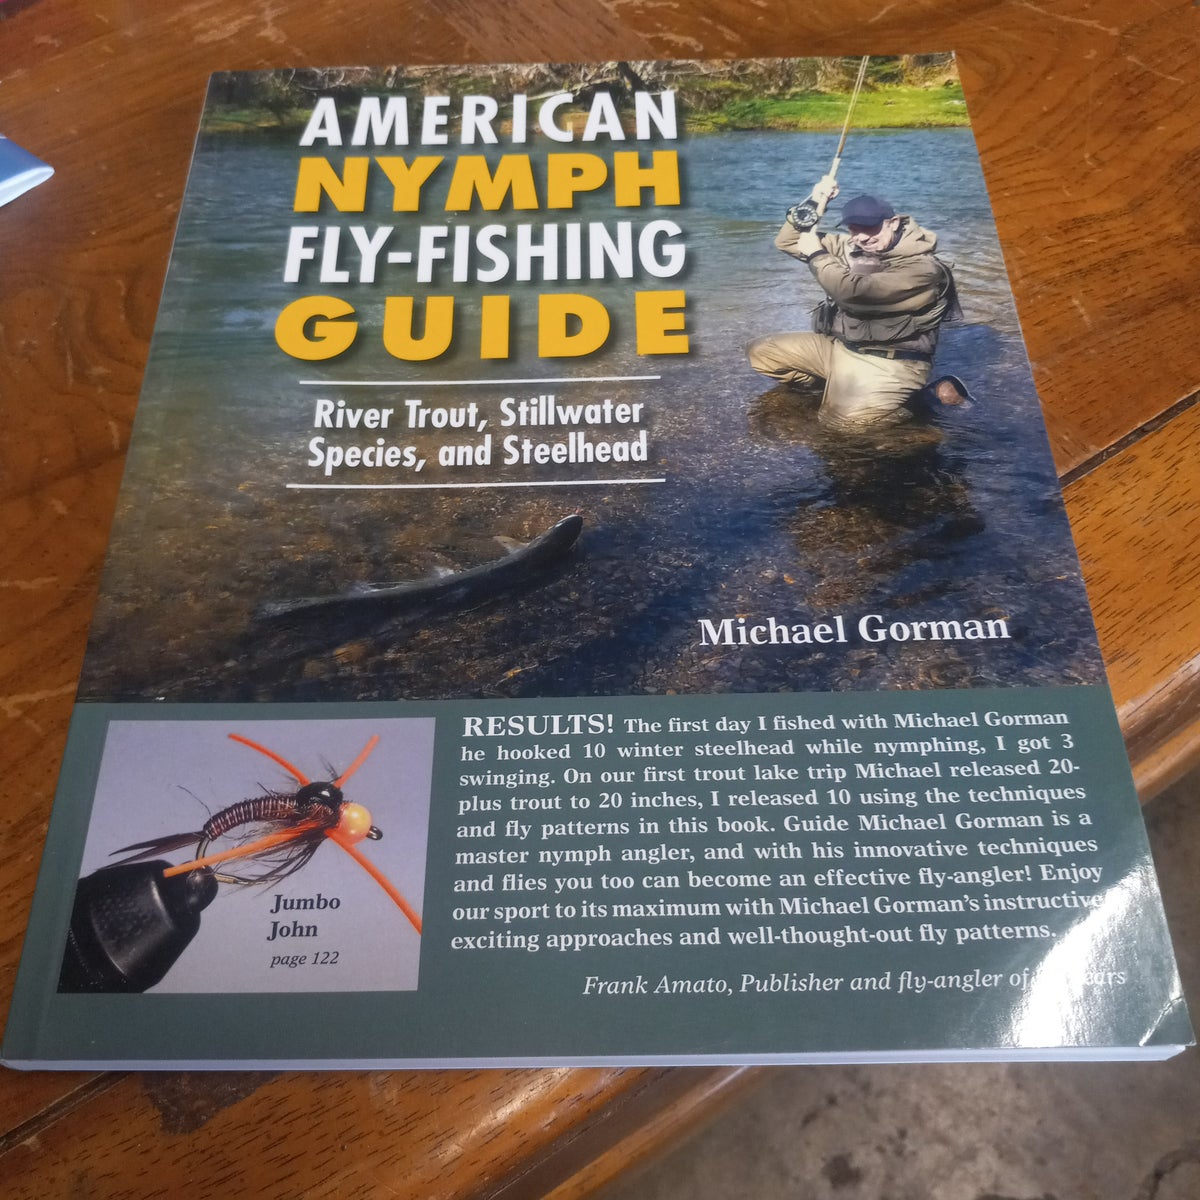 American Nymph Fly-Fishing Guide by Michael Gorman, Paperback